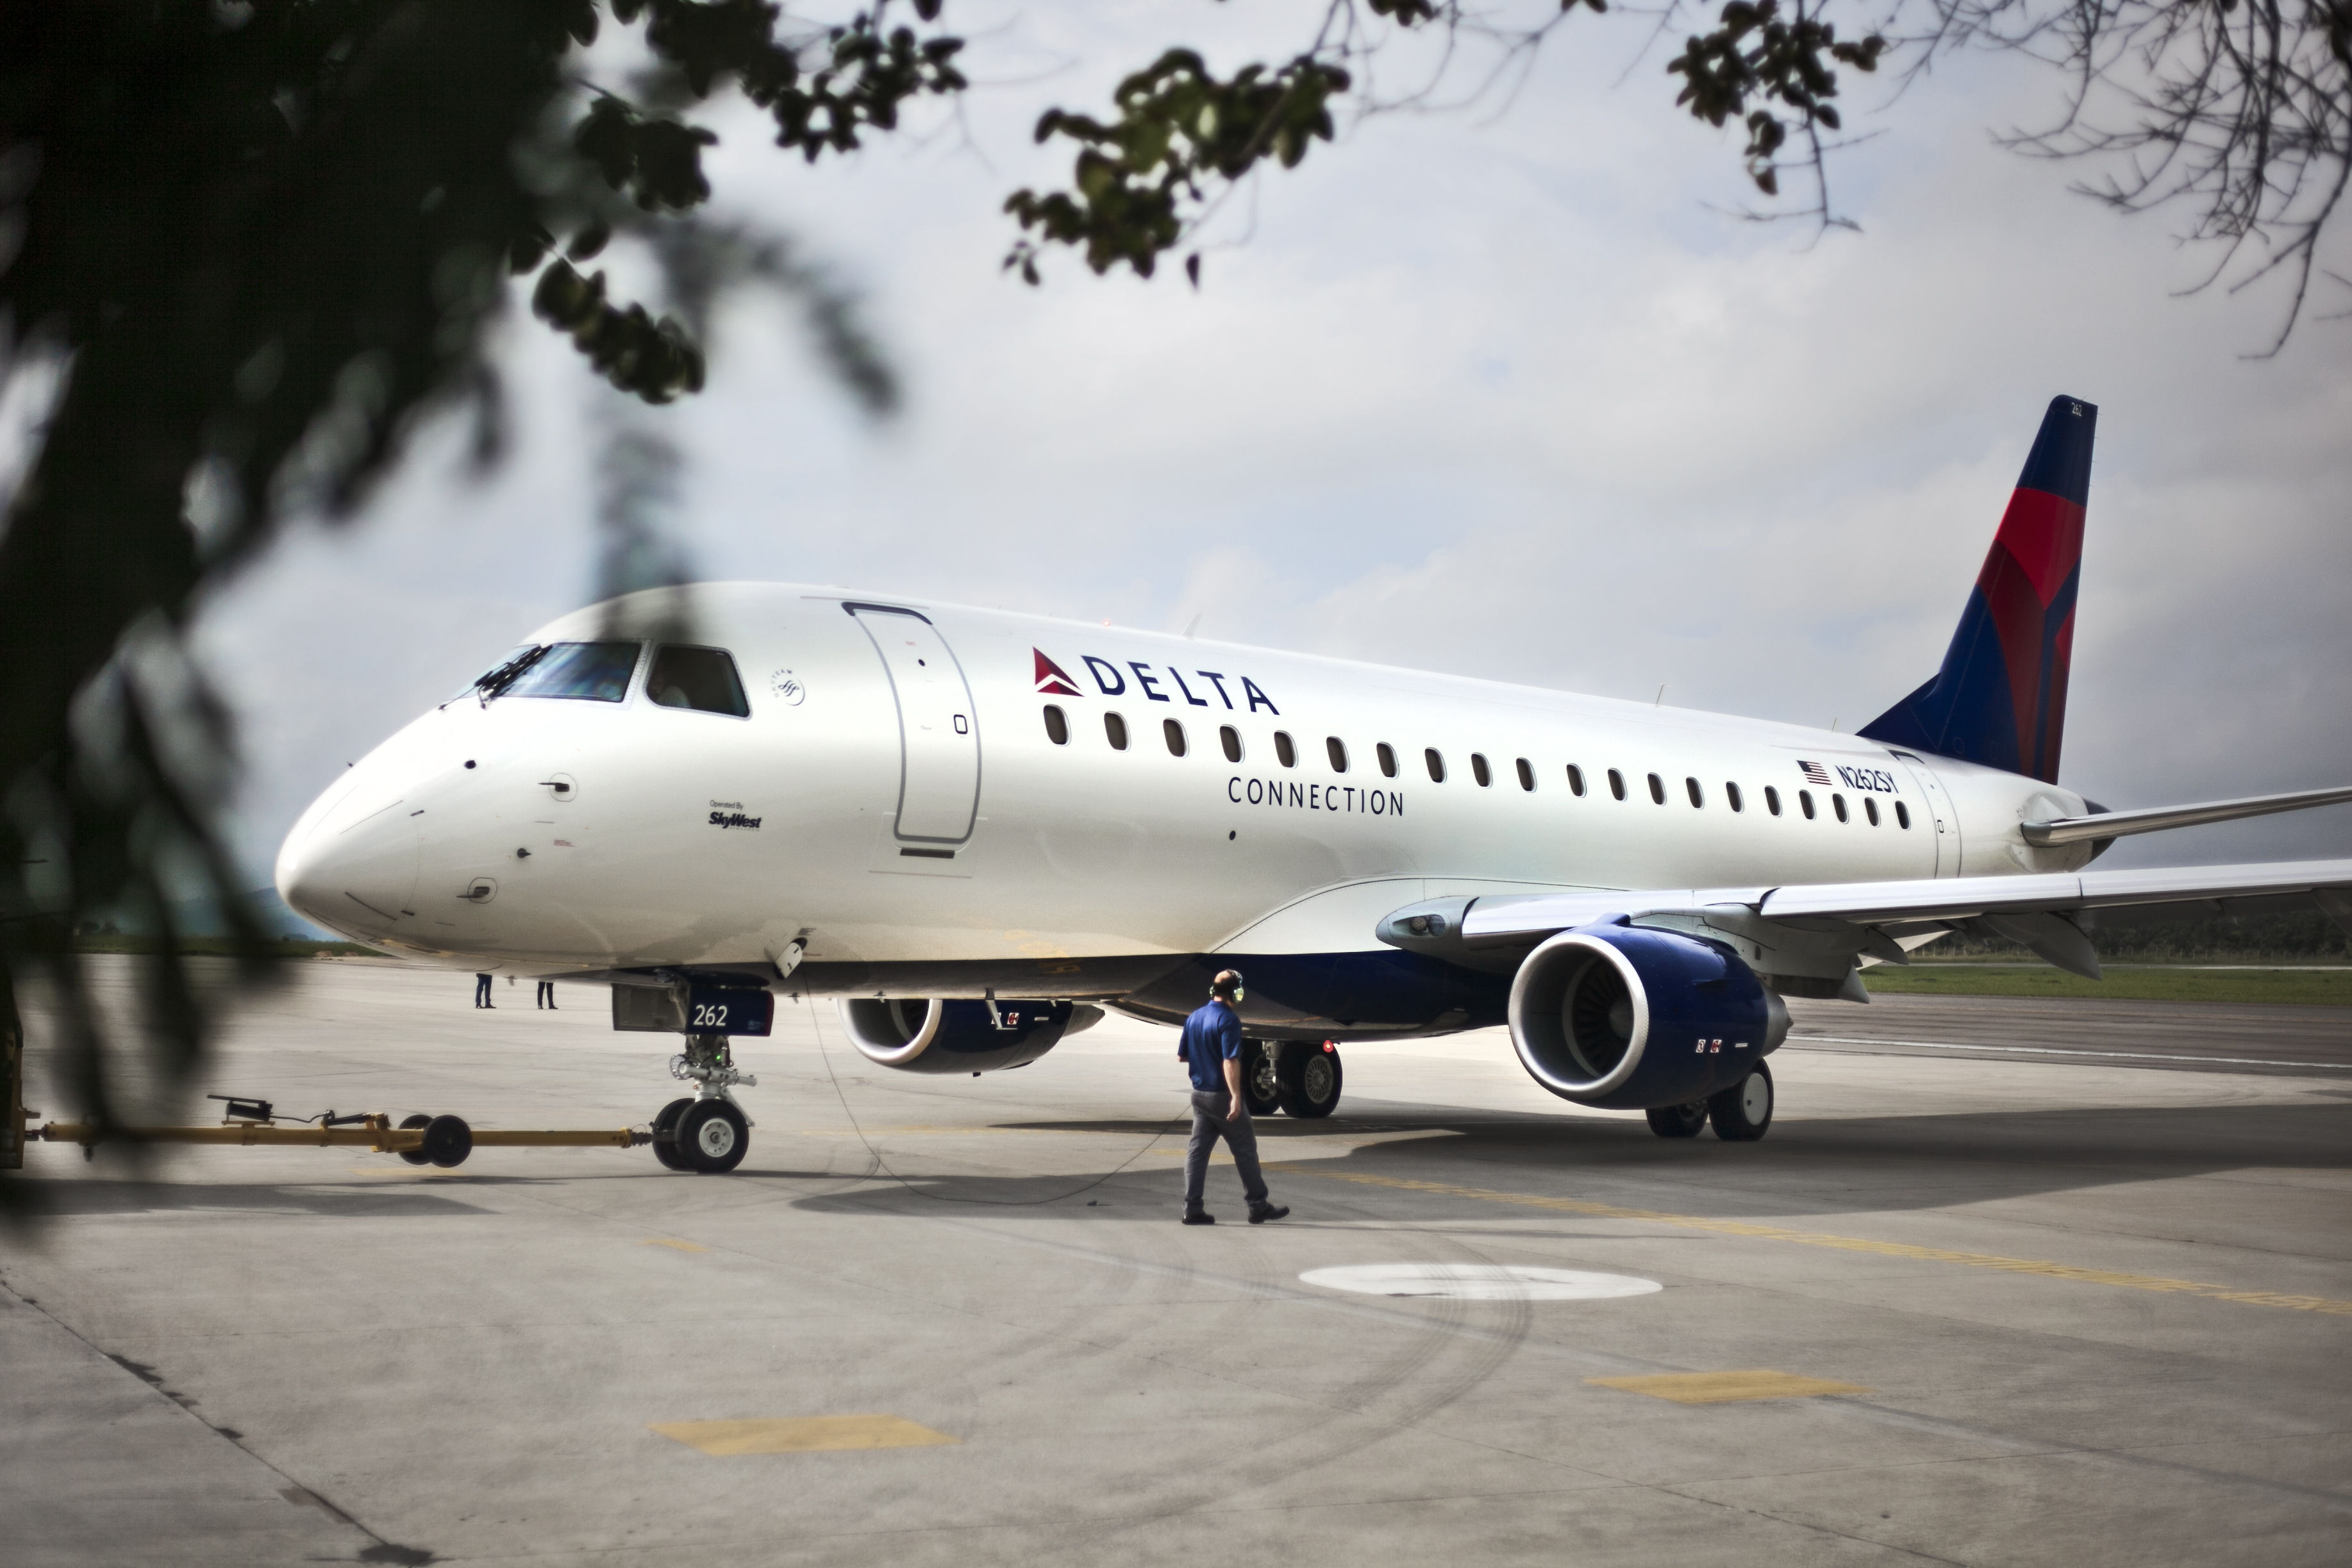 Skywest Airlines Aircraft